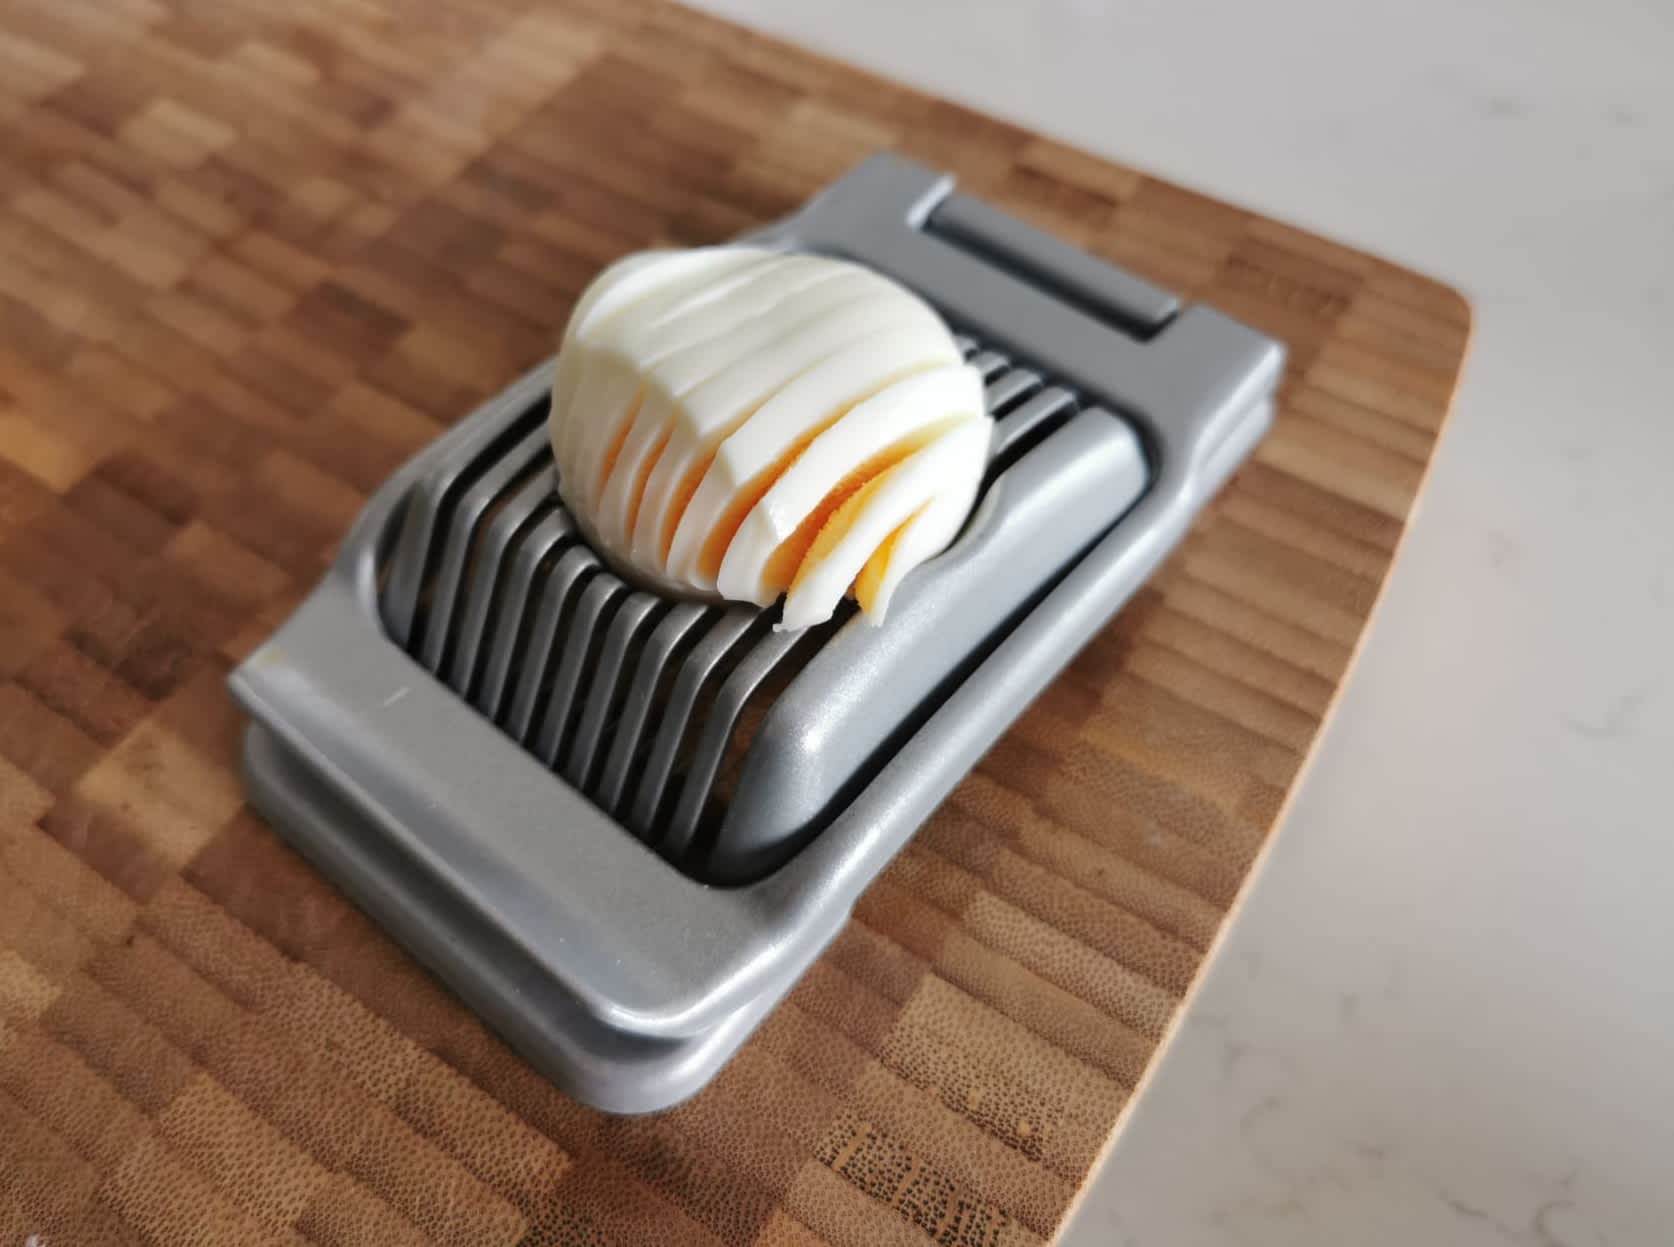 11 Ridiculously Brilliant Egg Gadgets You Didn't Know You Needed